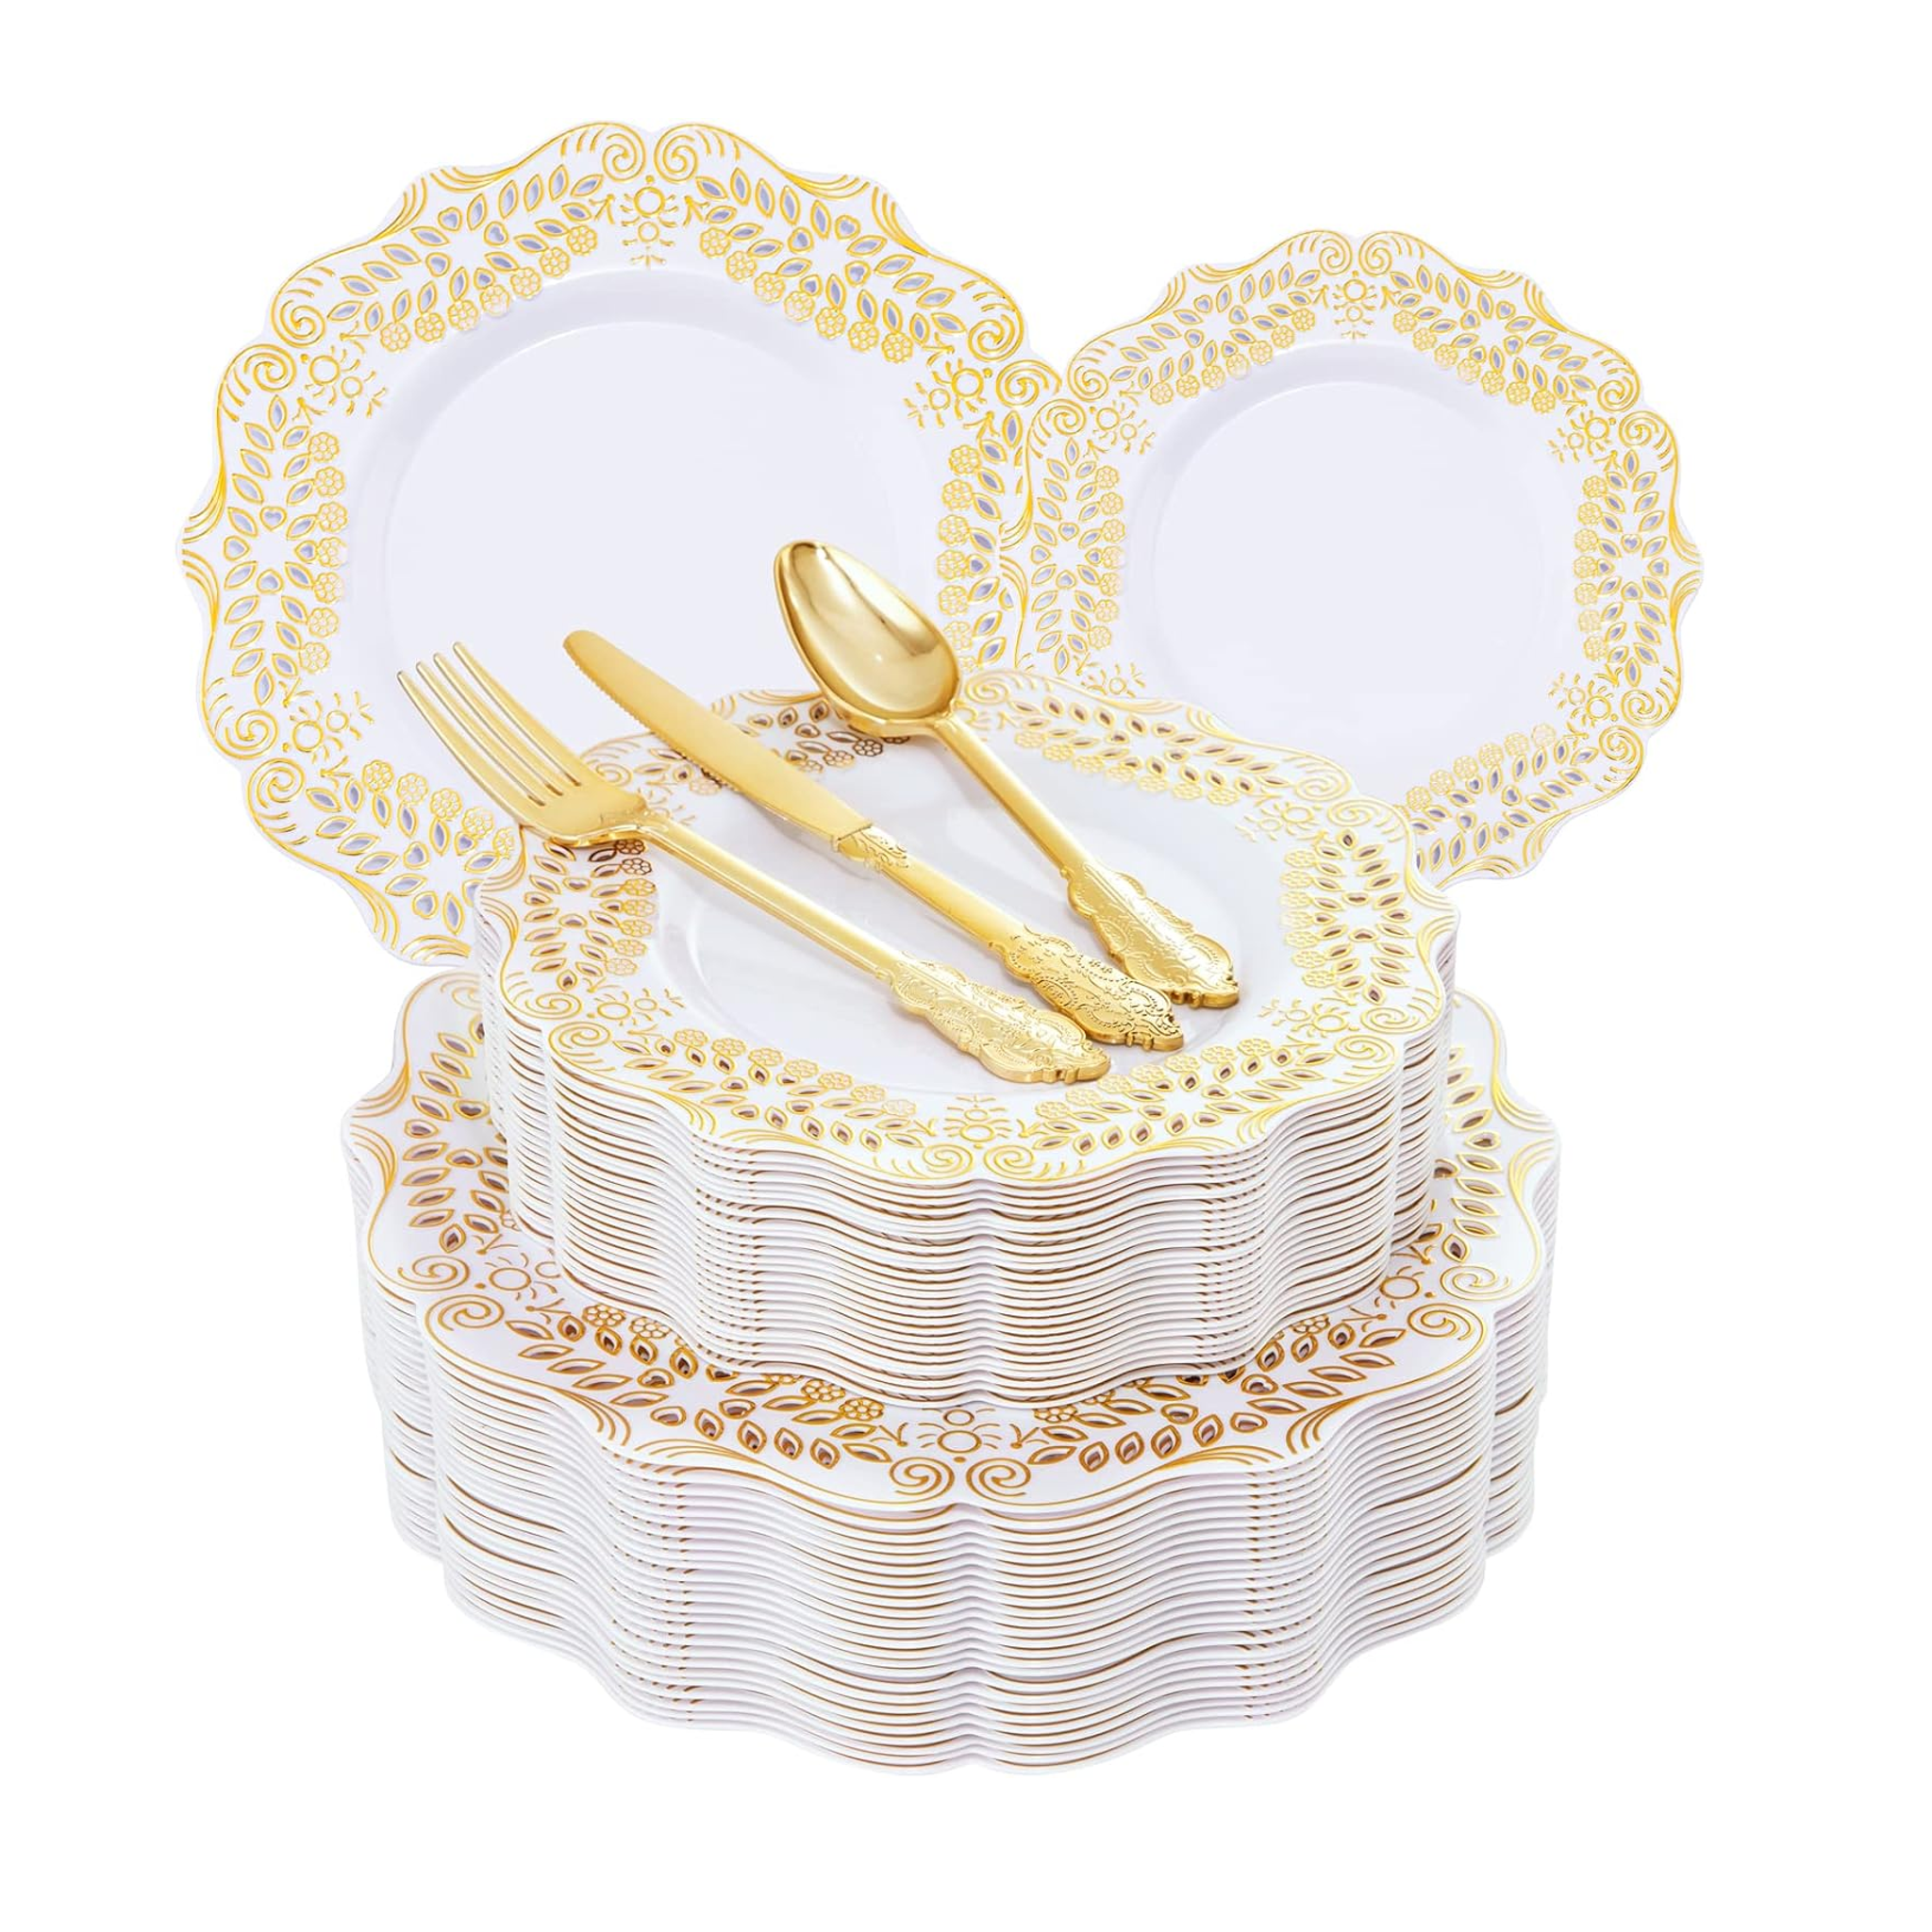 125 Pieces White and Gold Plastic Disposable Dinnerware Set